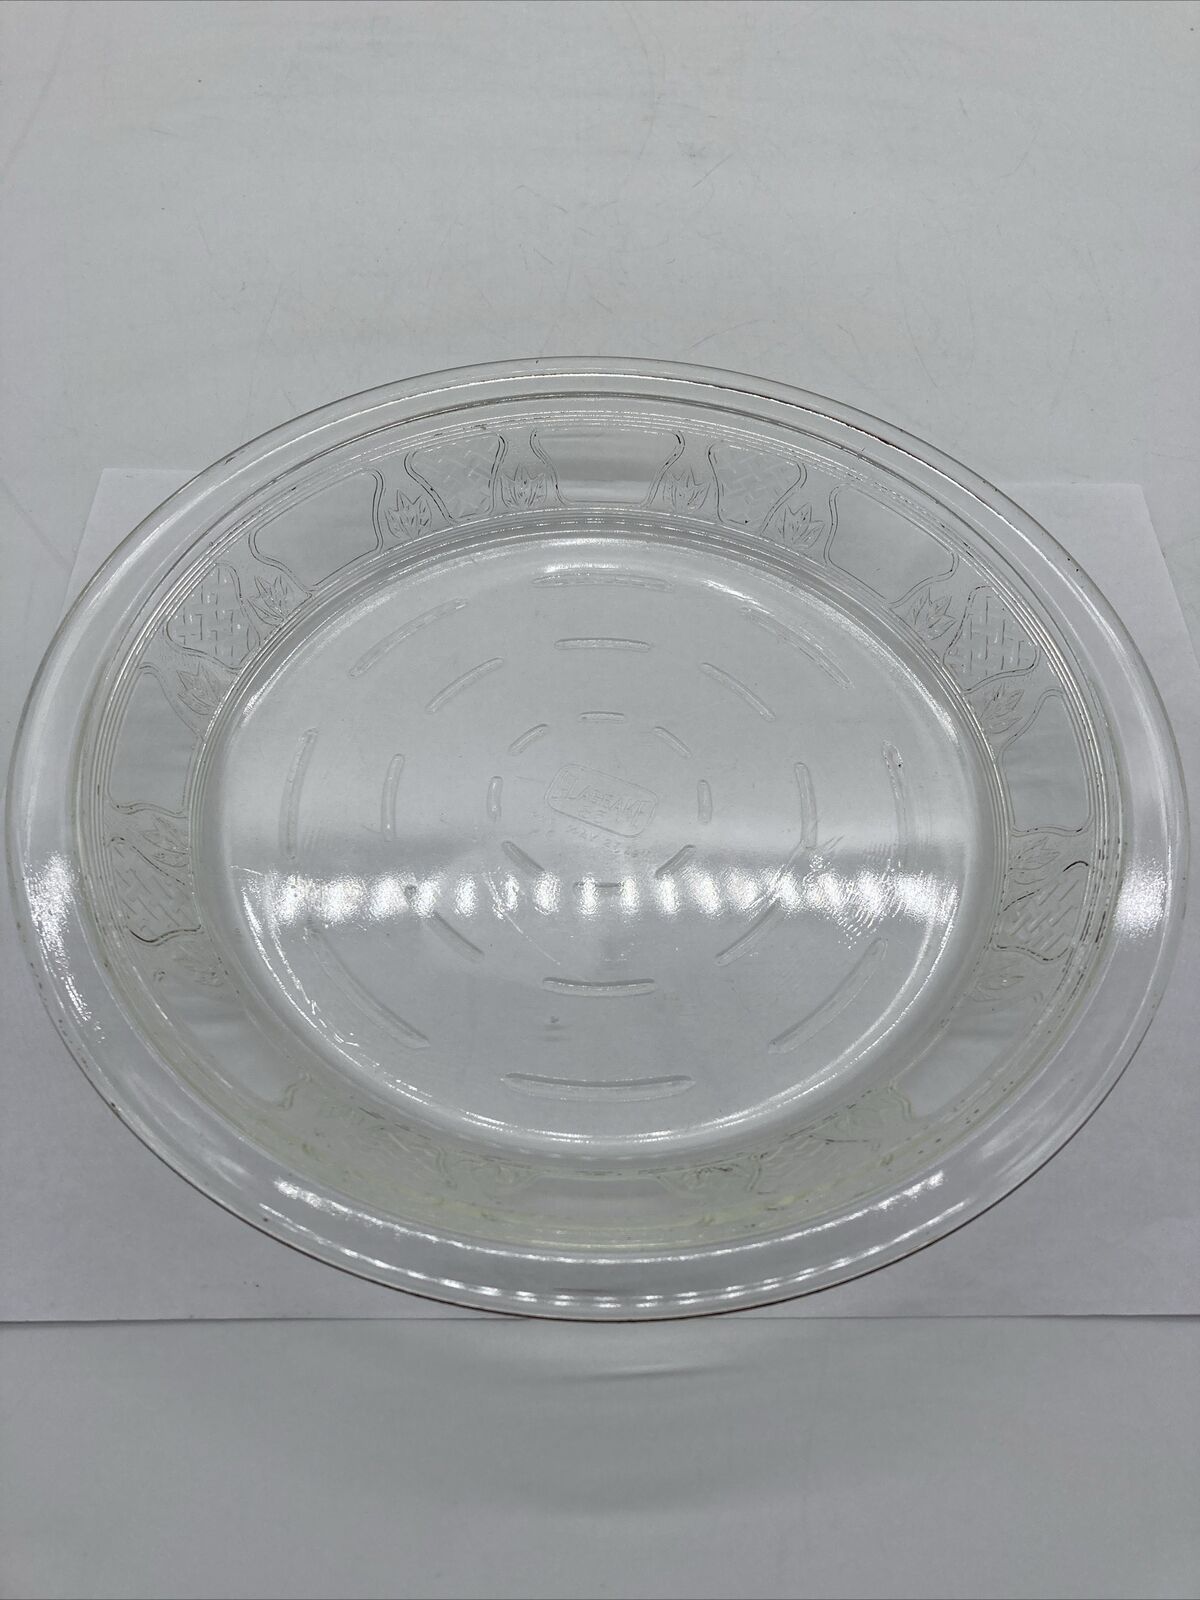 Glasbake 9” Pie Plate Patented May 27, 1919 Clear Vintage Harvest Design